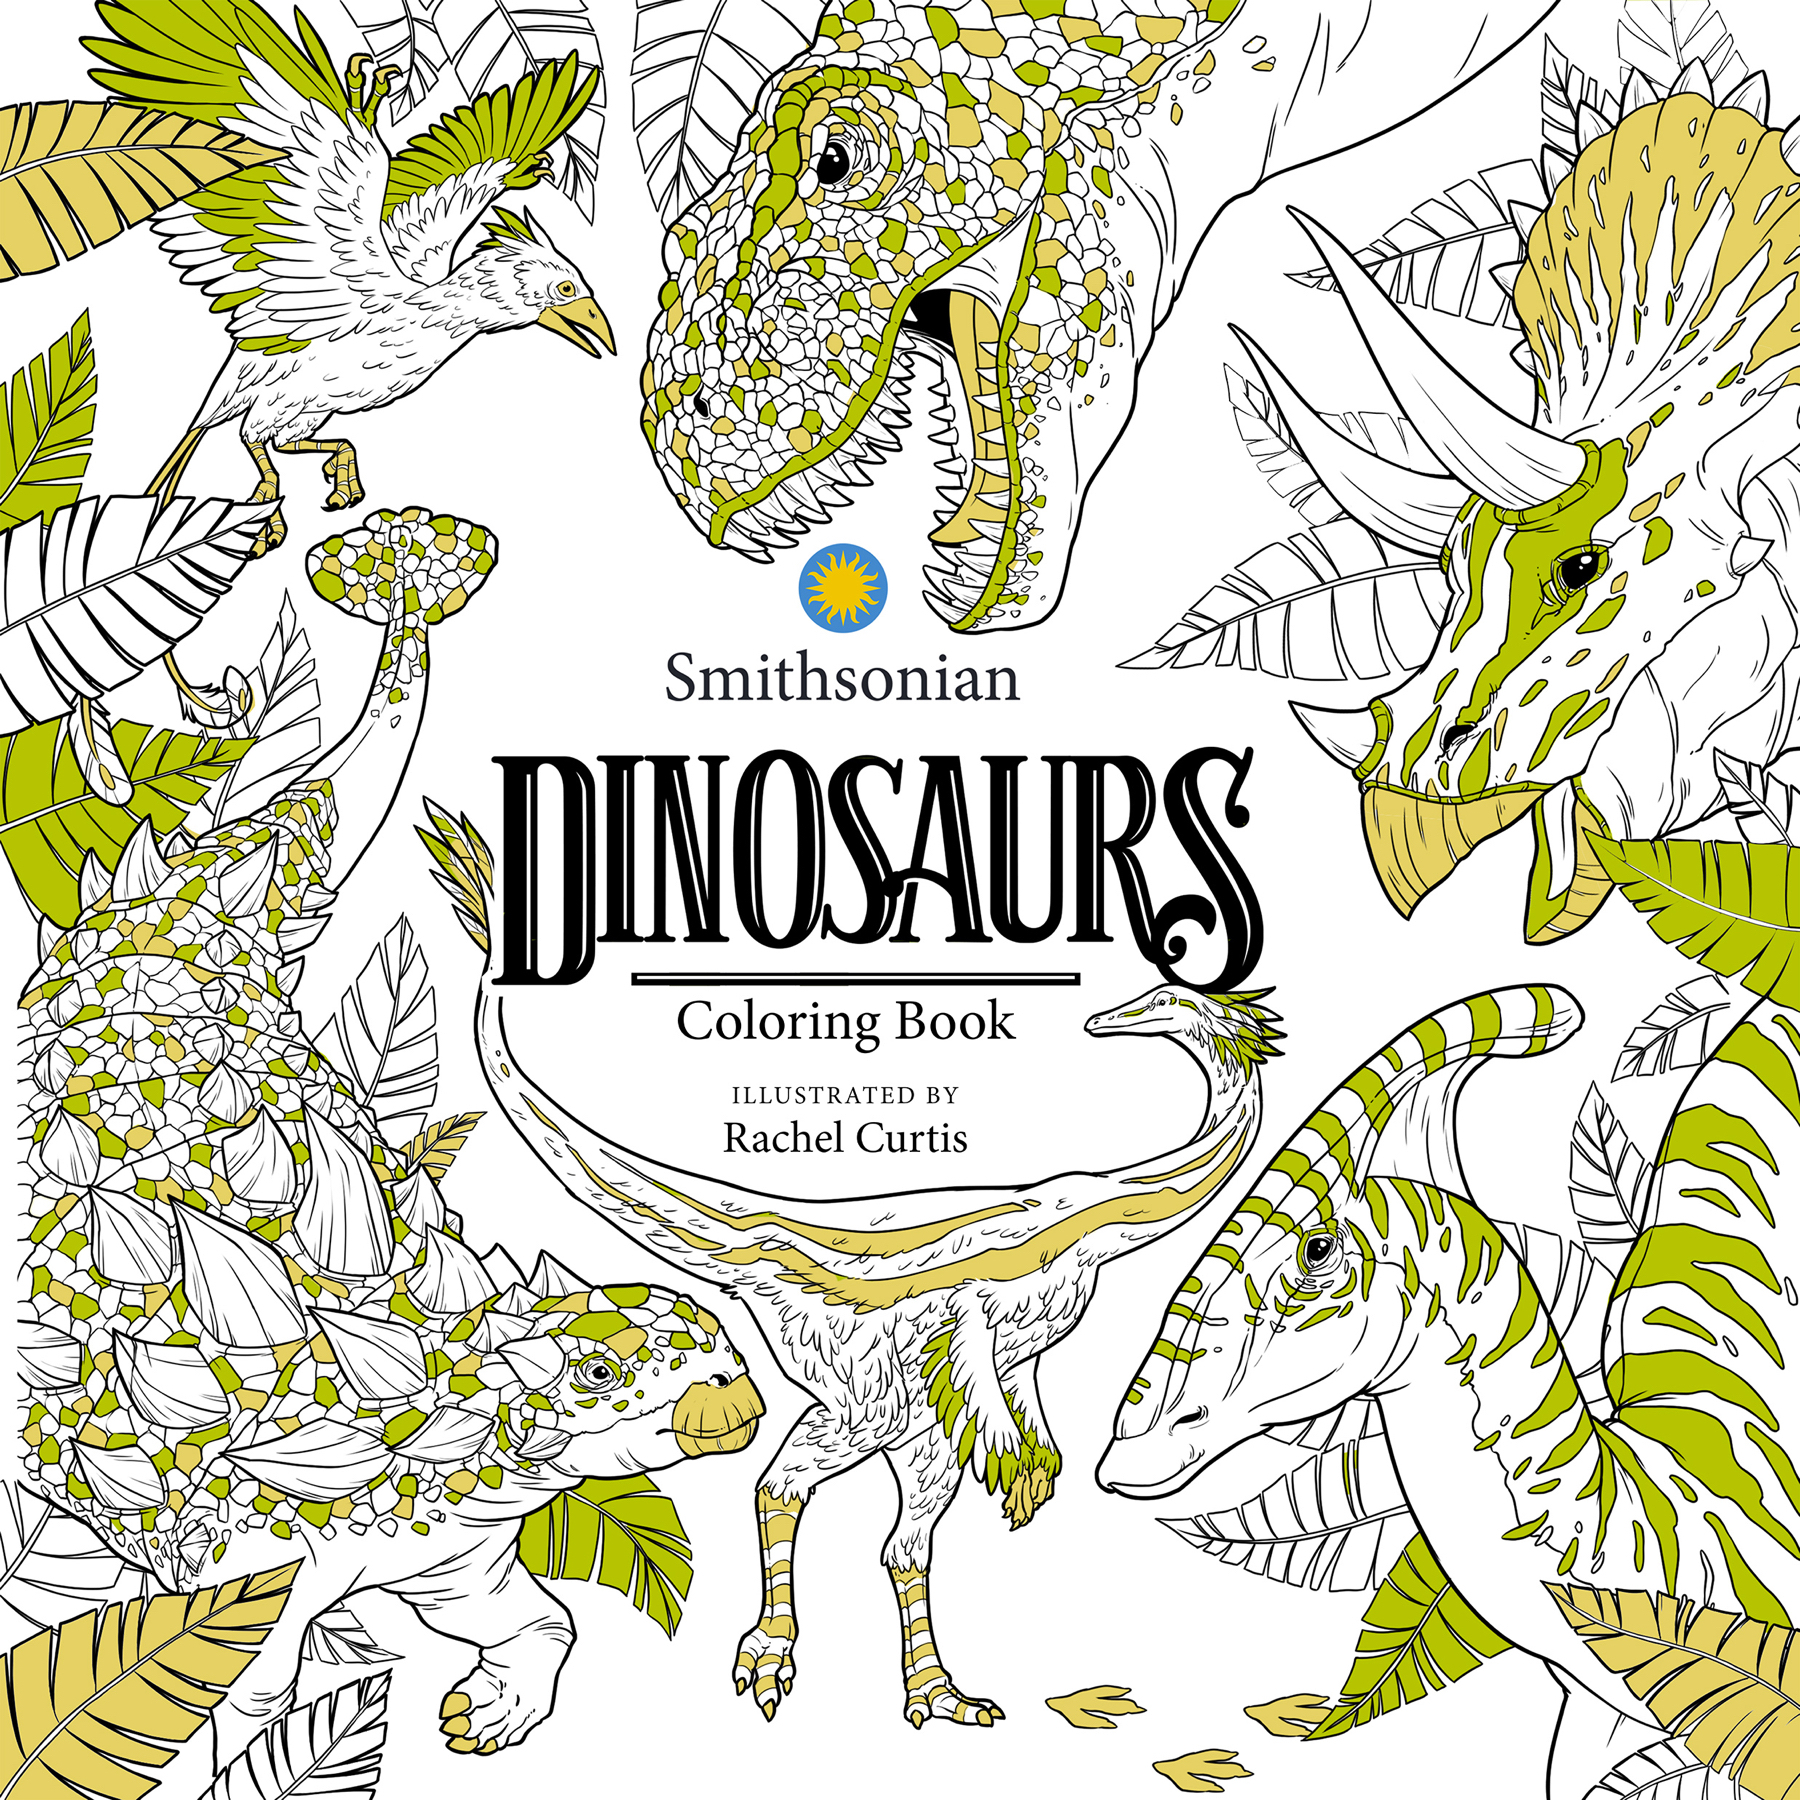 DINOSAURS SMITHSONIAN COLORING BOOK